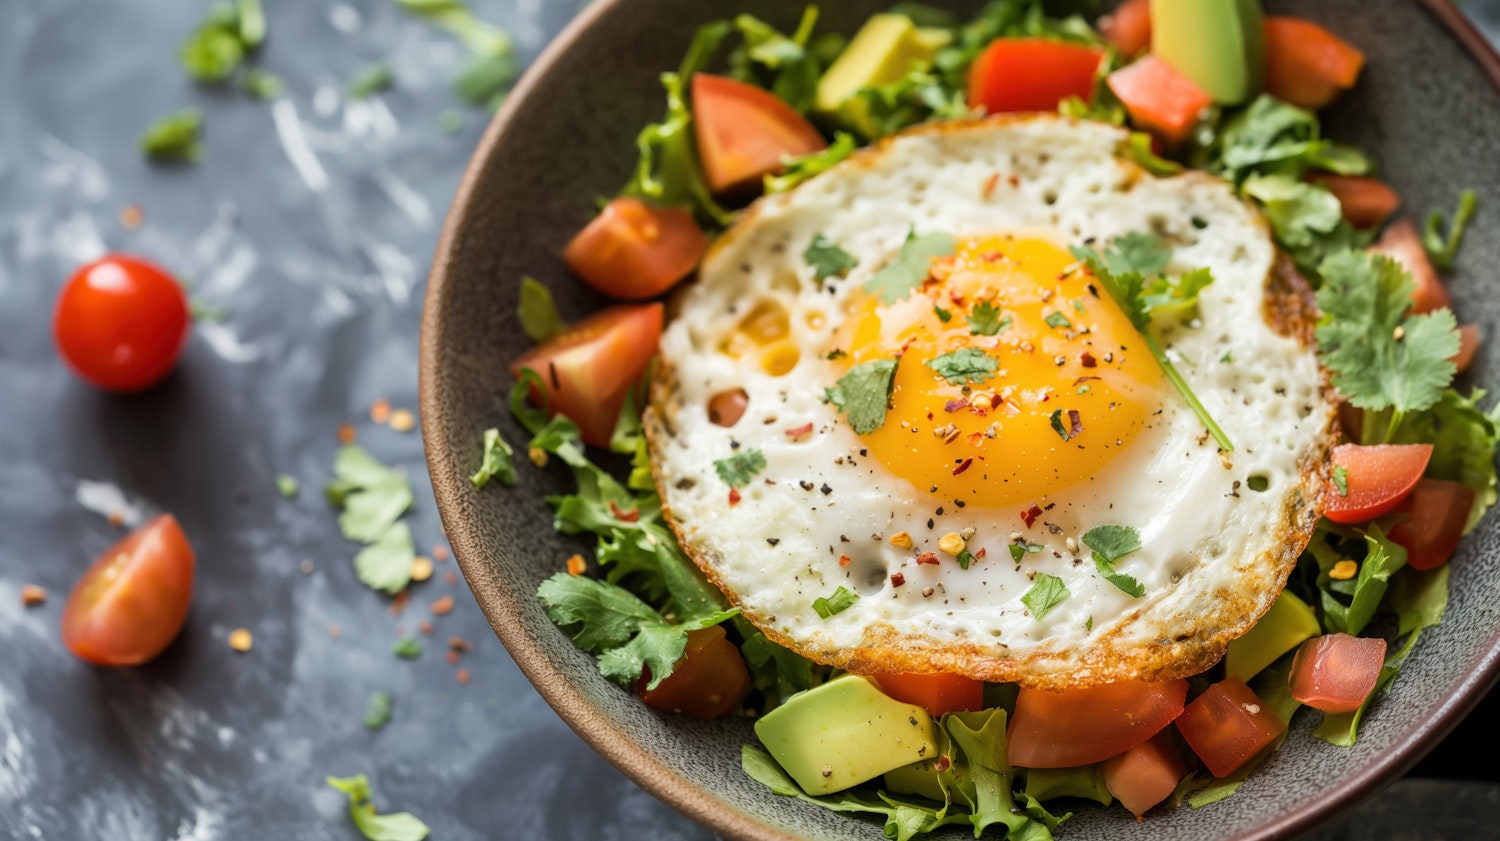 Colorful Salad with Sunny-Side-Up Egg